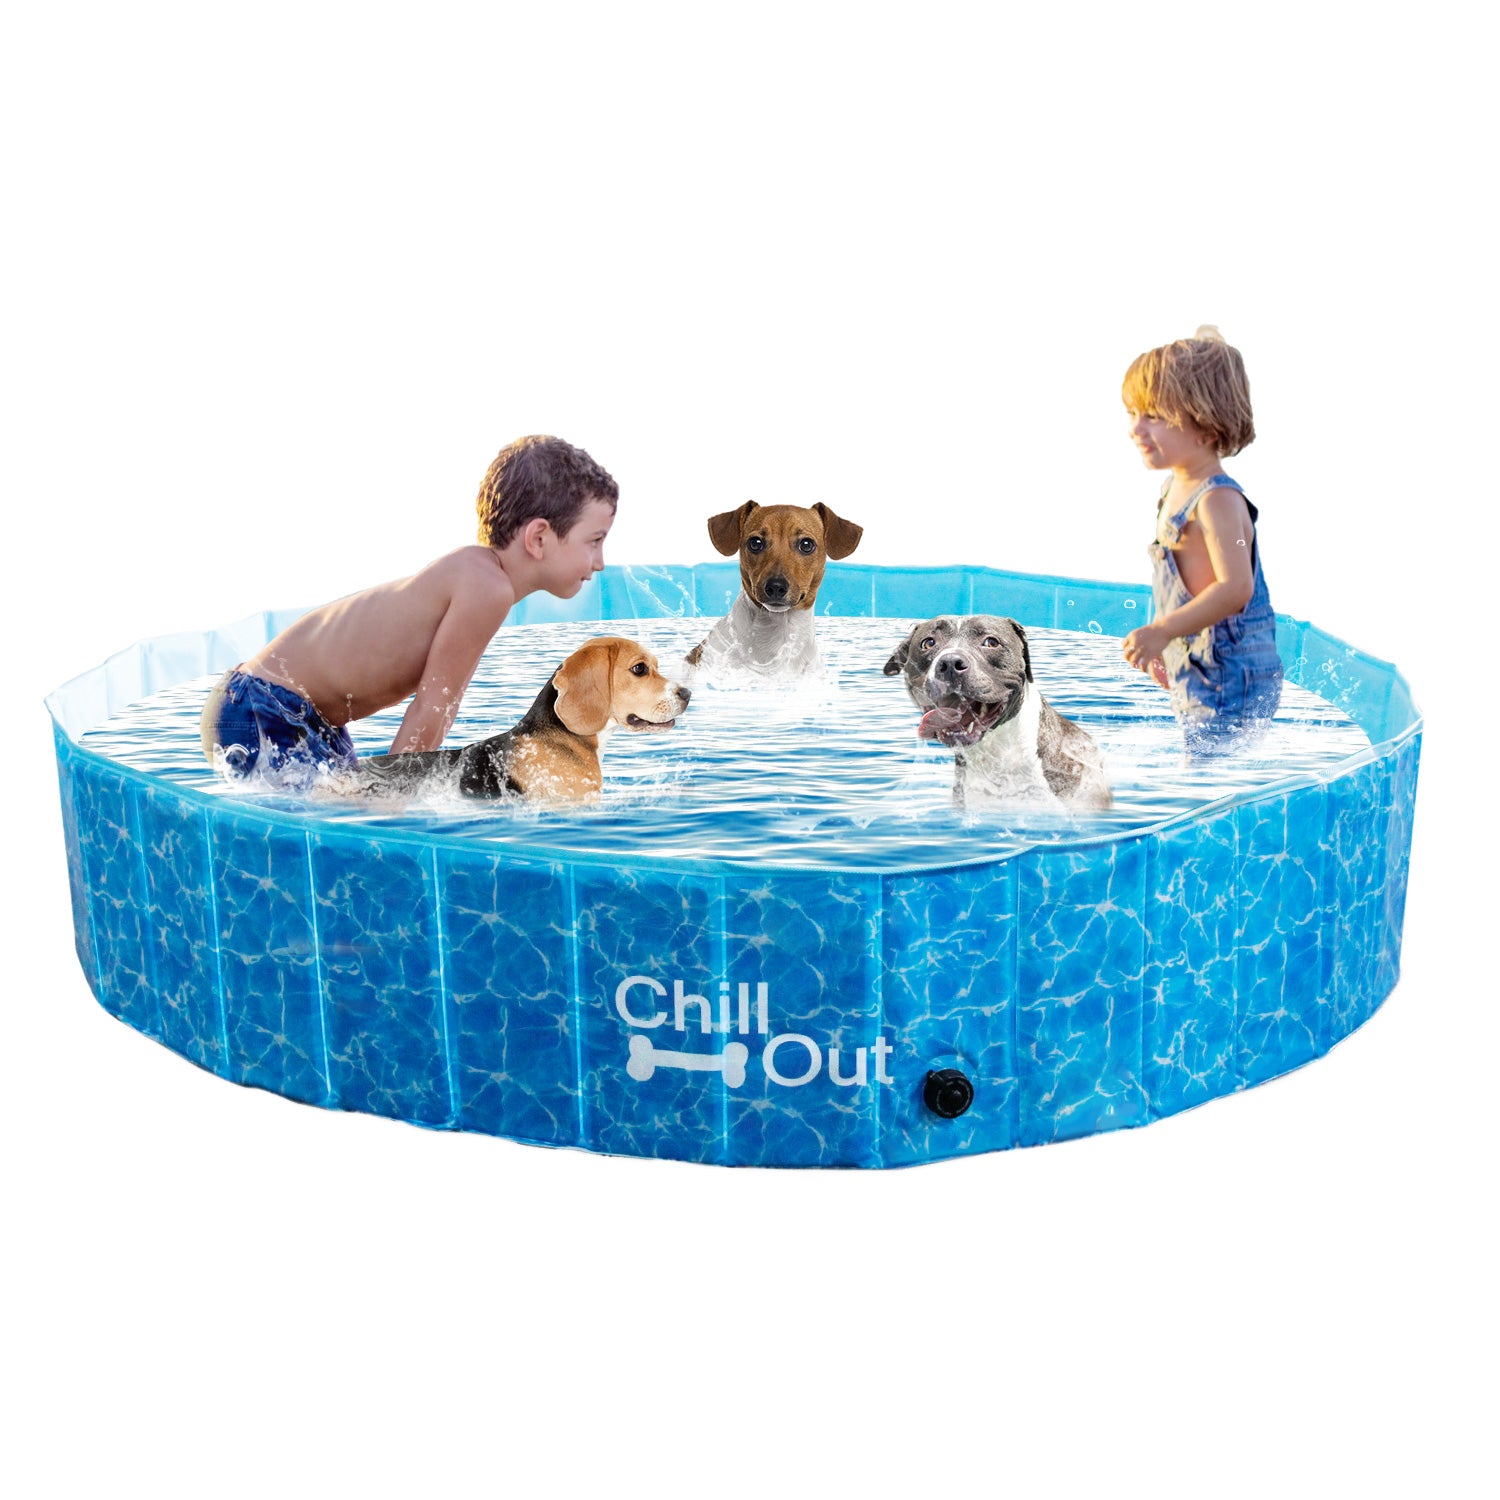 ALL FOR PAWS Dog Pool,Dog Pools for Large Dogs,High Density Fiberboard Foldable Dog Pool,Indoor & Outdoor Pool for Dogs and Kids,63“